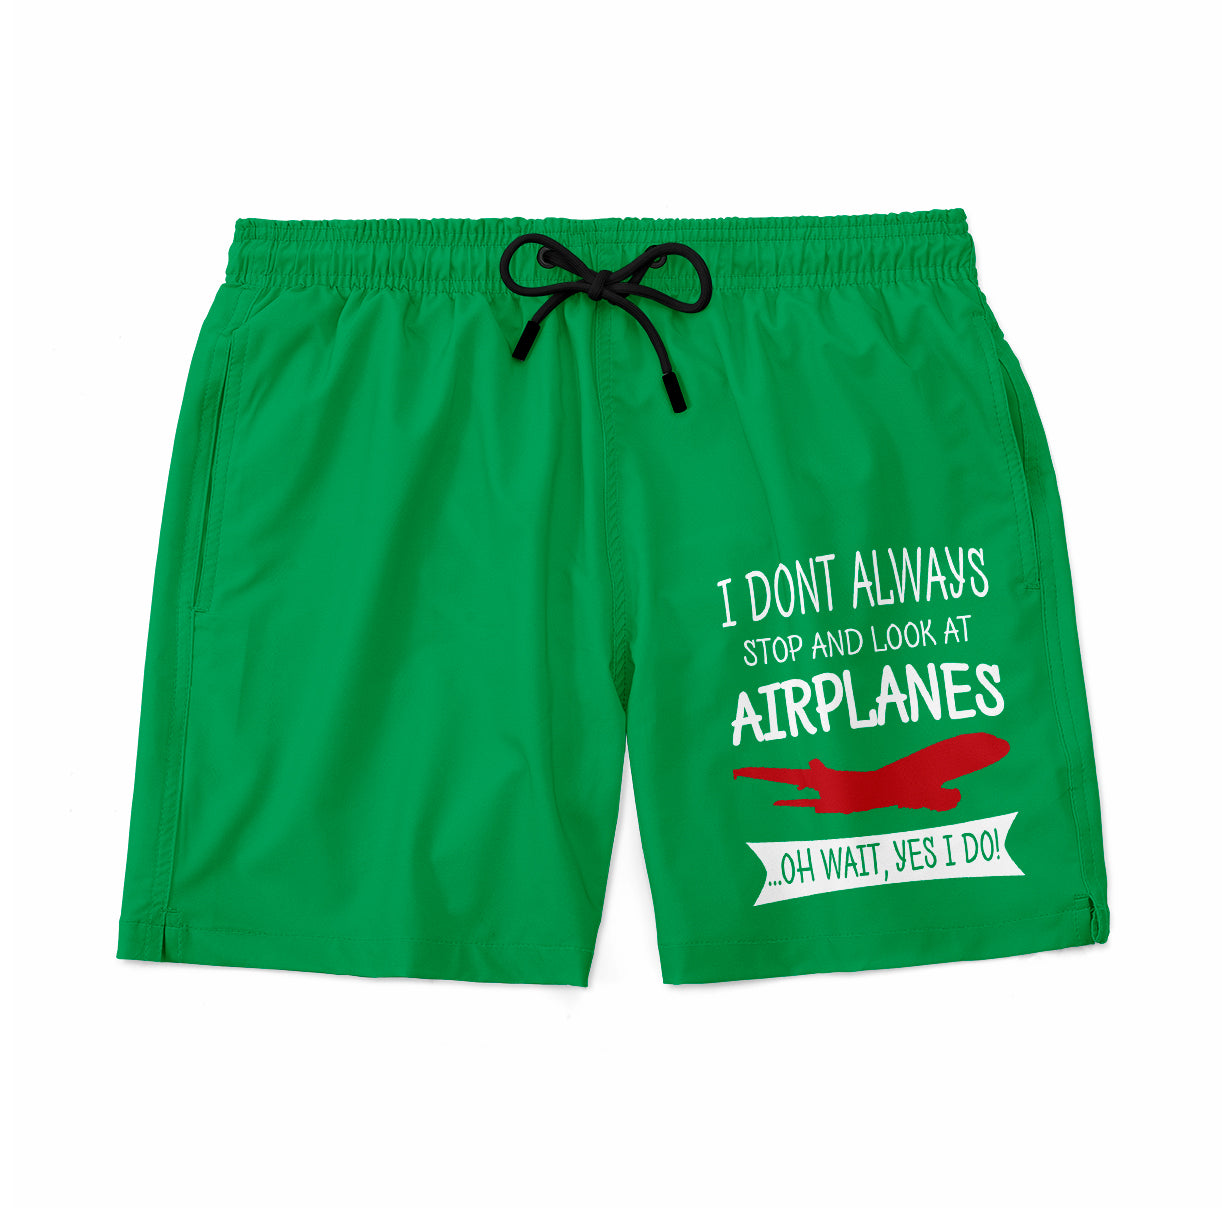 I Don't Always Stop and Look at Airplanes Designed Swim Trunks & Shorts